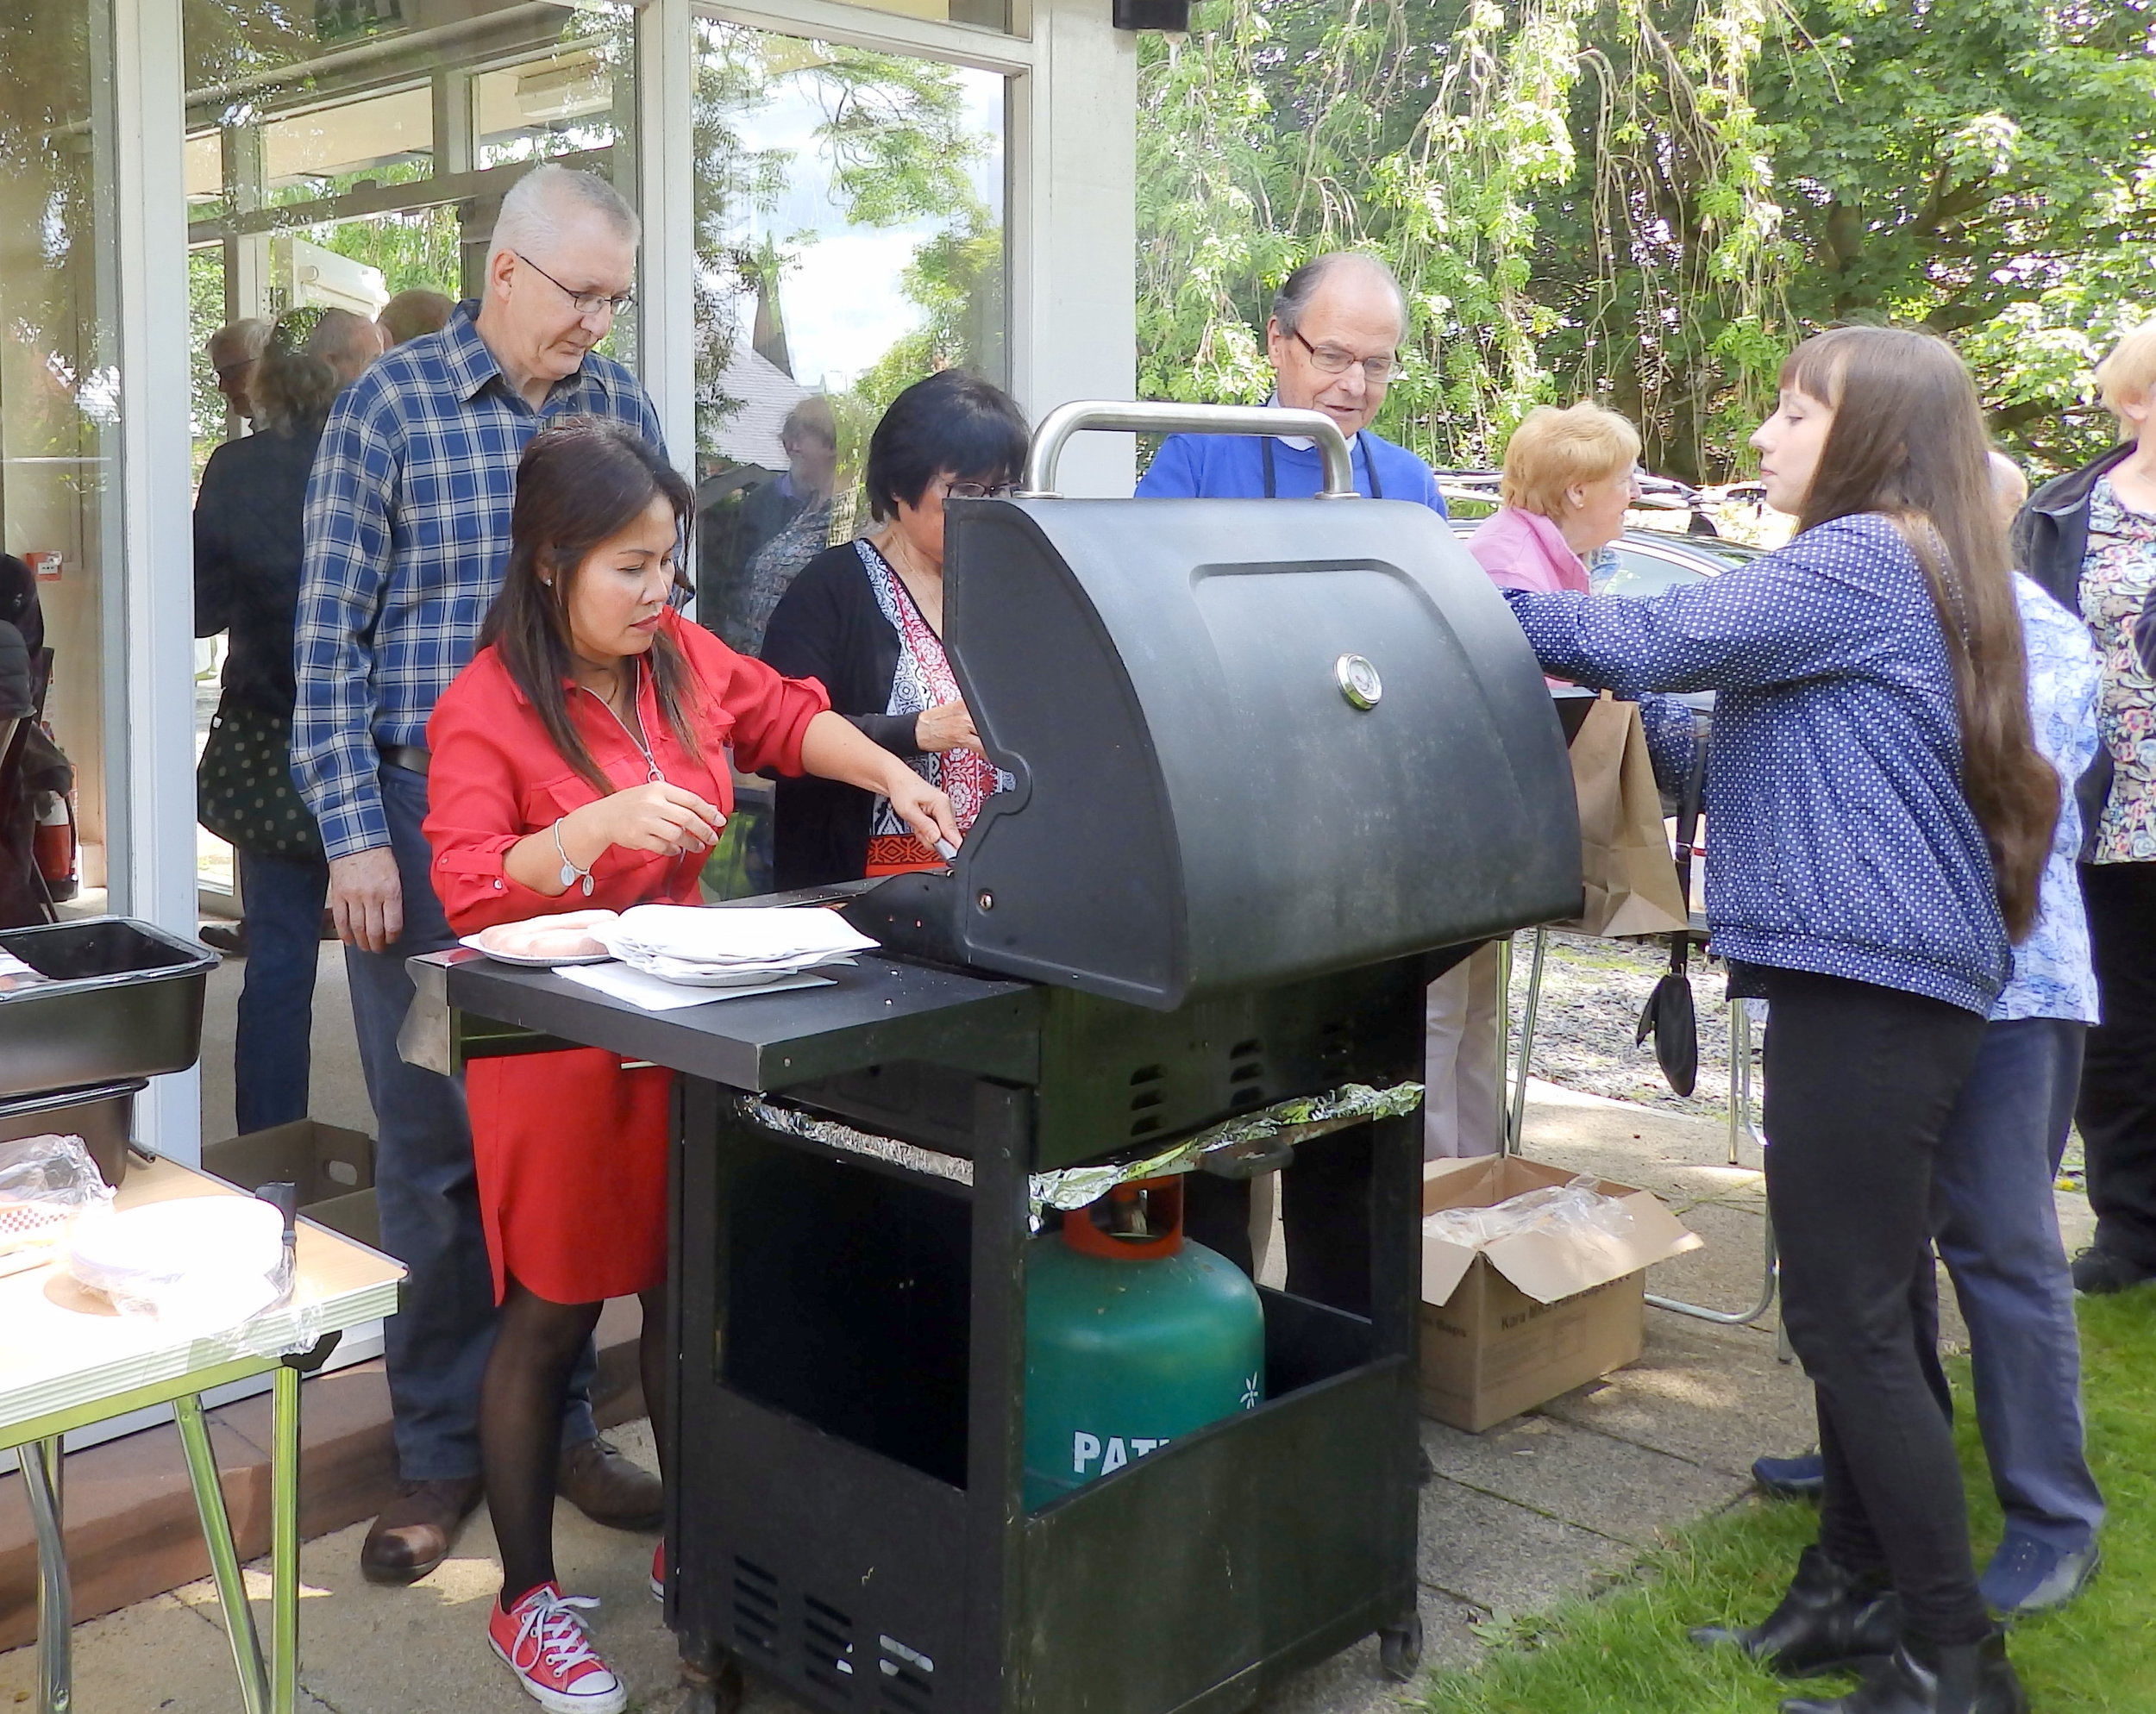 Barbecue for Monze, Summer 2019